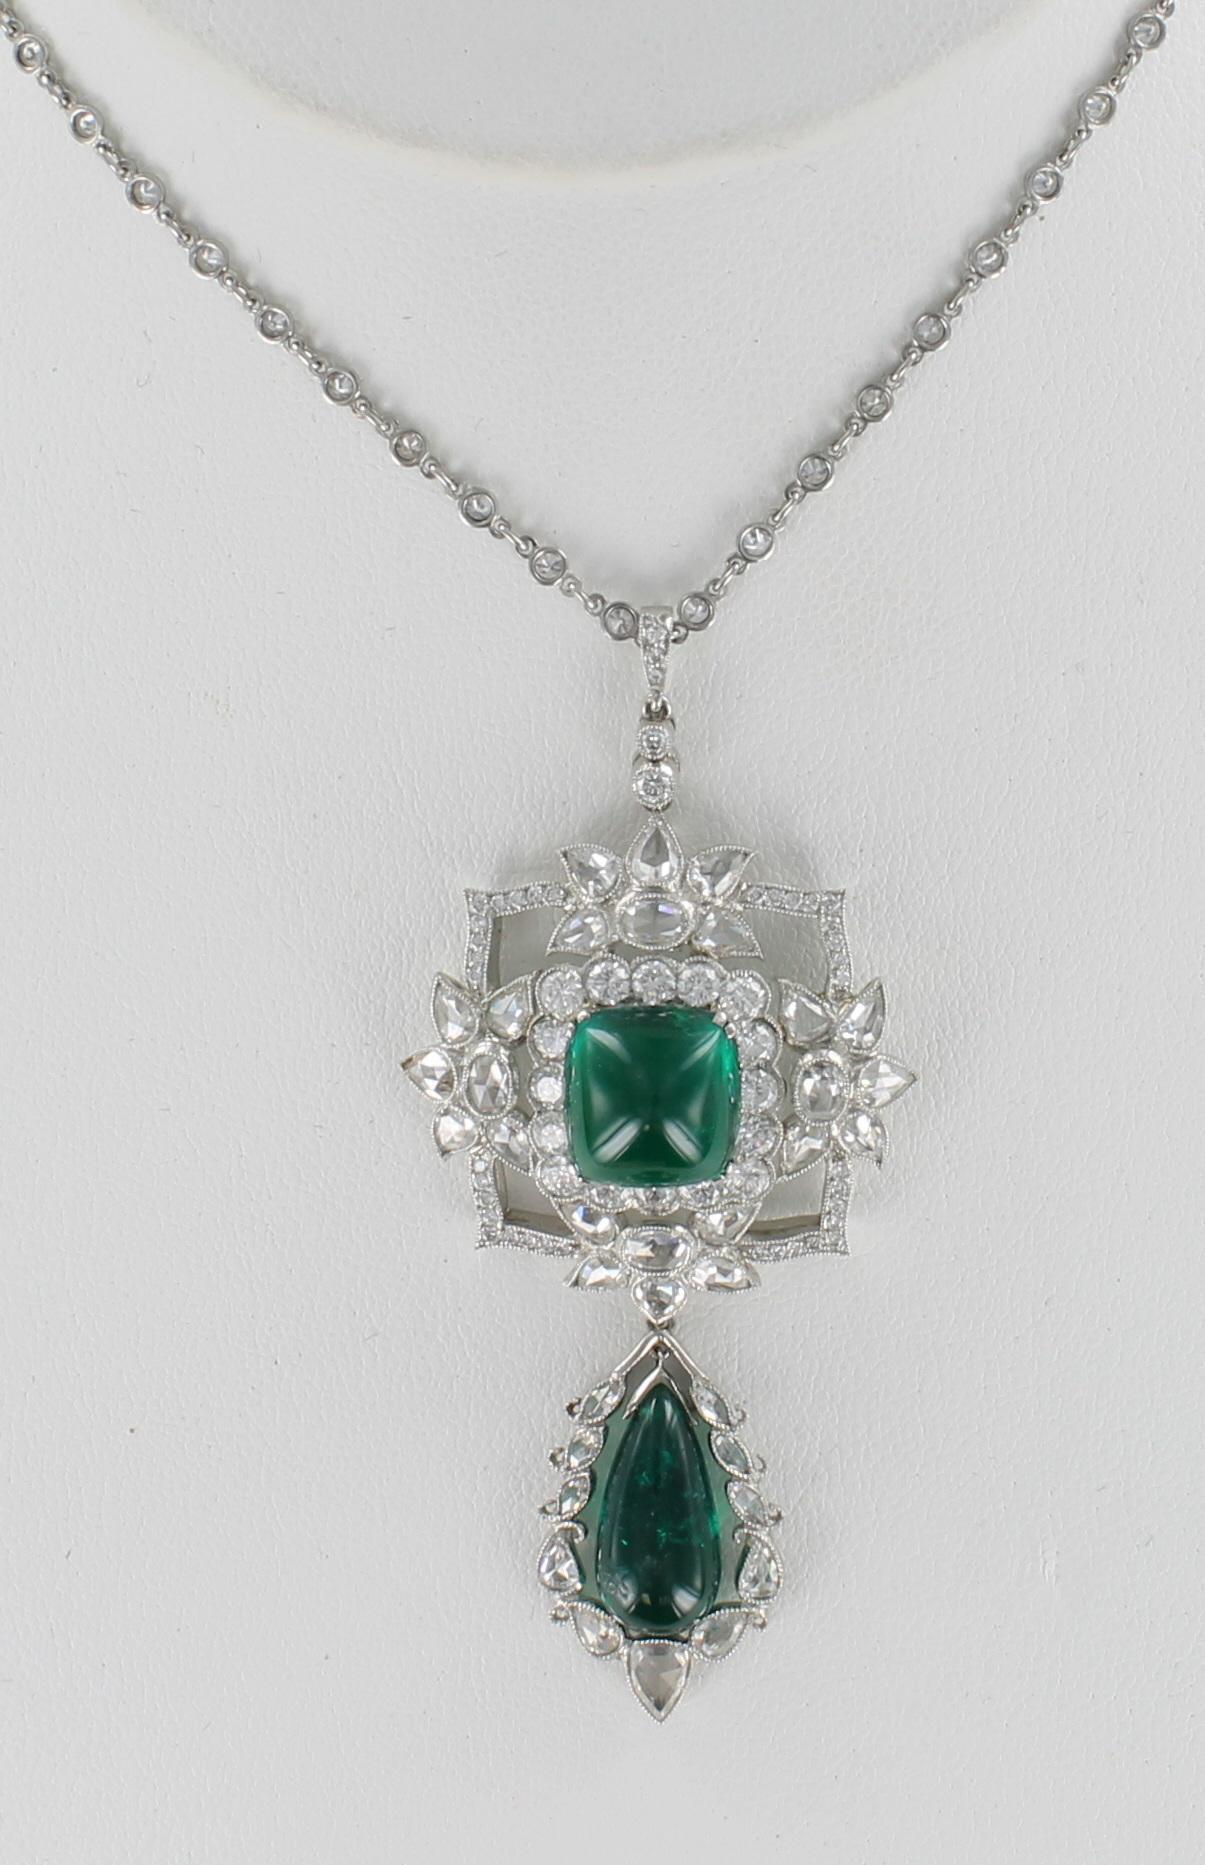 This luxurious pendant features two magnificent cabochon emeralds, 11.5 carats total weight.  The emerald on the top is a cushion cut, and the pear-shaped emerald sways gently at the bottom.  3.50 carats total weight of rose cut diamonds and 1.40